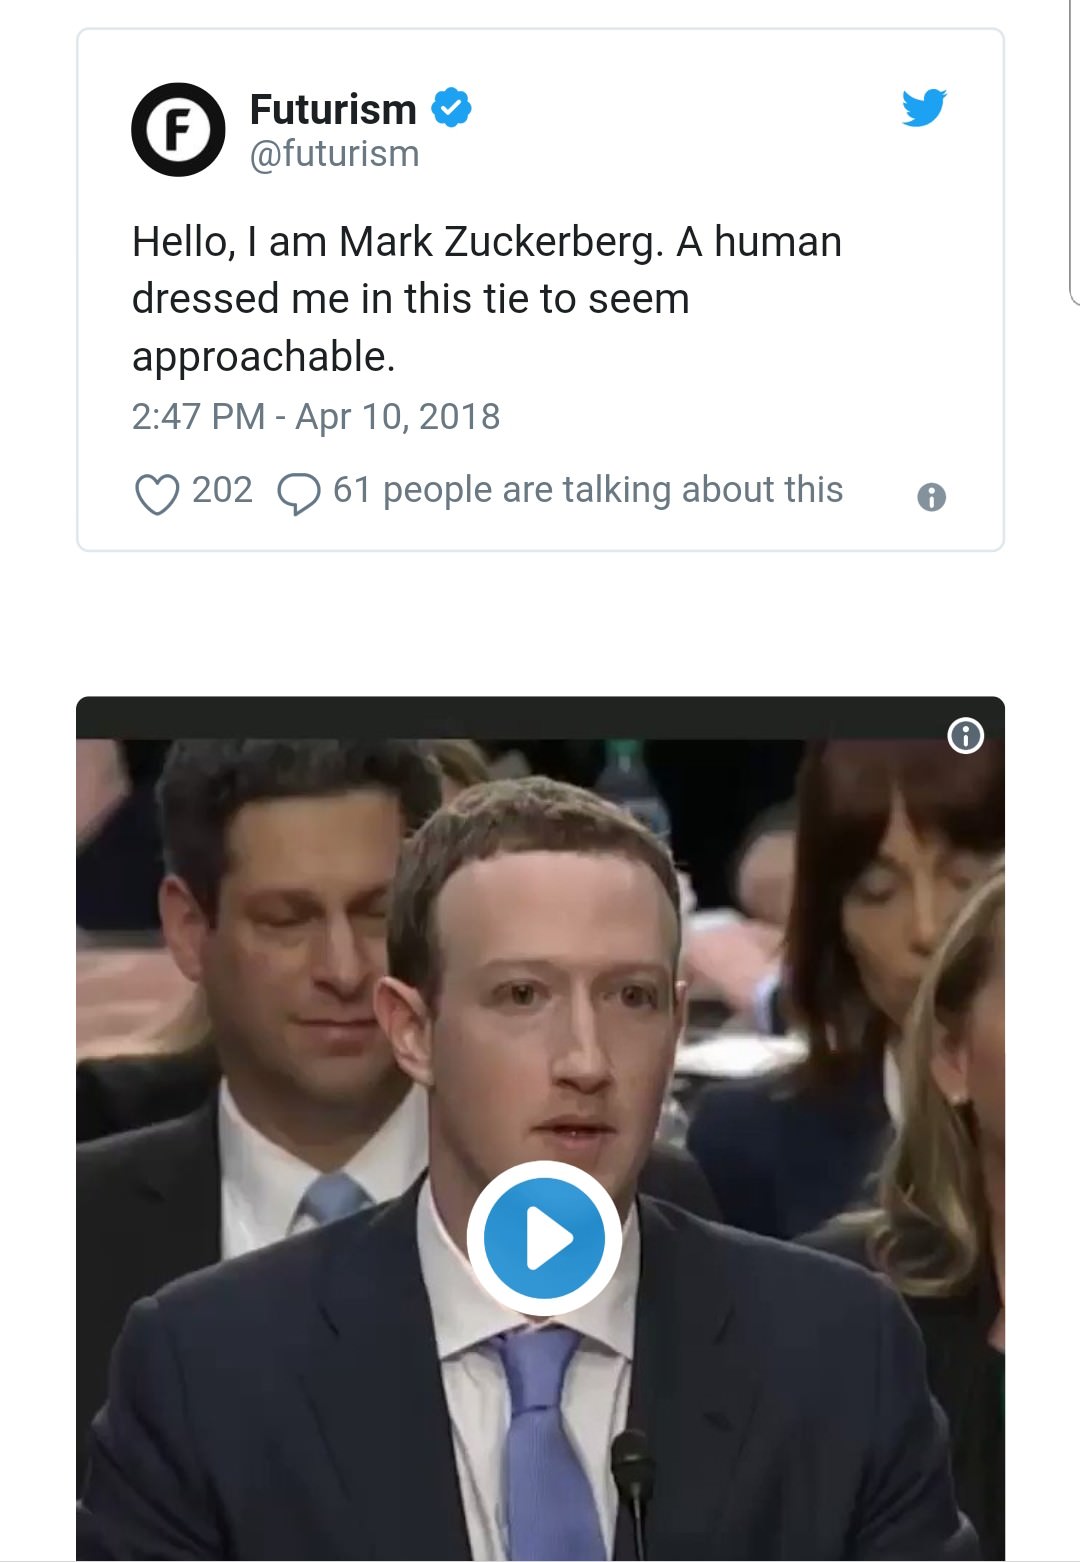 mark zuckerberg smile slider - Futurism Hello, I am Mark Zuckerberg. A human dressed me in this tie to seem approachable. 202 6